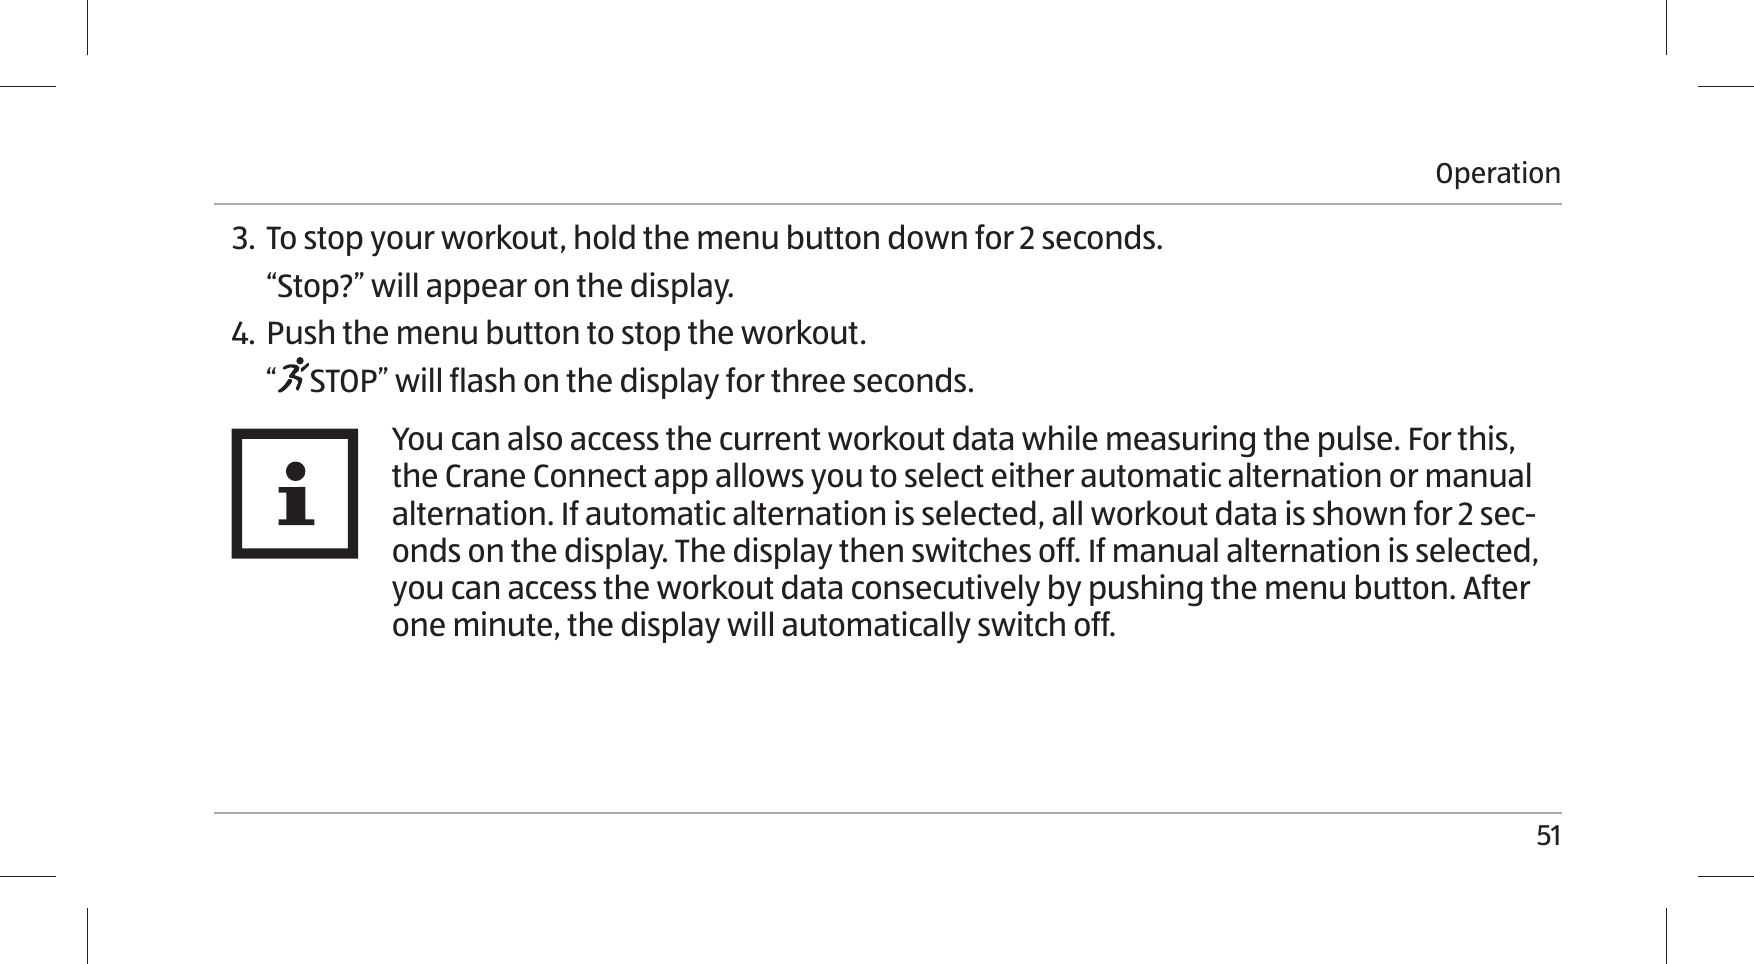 Operation513.  To stop your workout, hold the menu button down for 2 seconds.“Stop?” will appear on the display.4. Push the menu button to stop the workout.“STOP” will flash on the display for three seconds.You can also access the current workout data while measuring the pulse. For this, the Crane Connect app allows you to select either automatic alternation or manual alternation. If automatic alternation is selected, all workout data is shown for 2 sec-onds on the display. The display then switches off. If manual alternation is selected, you can access the workout data consecutively by pushing the menu button. After one minute, the display will automatically switch off. 